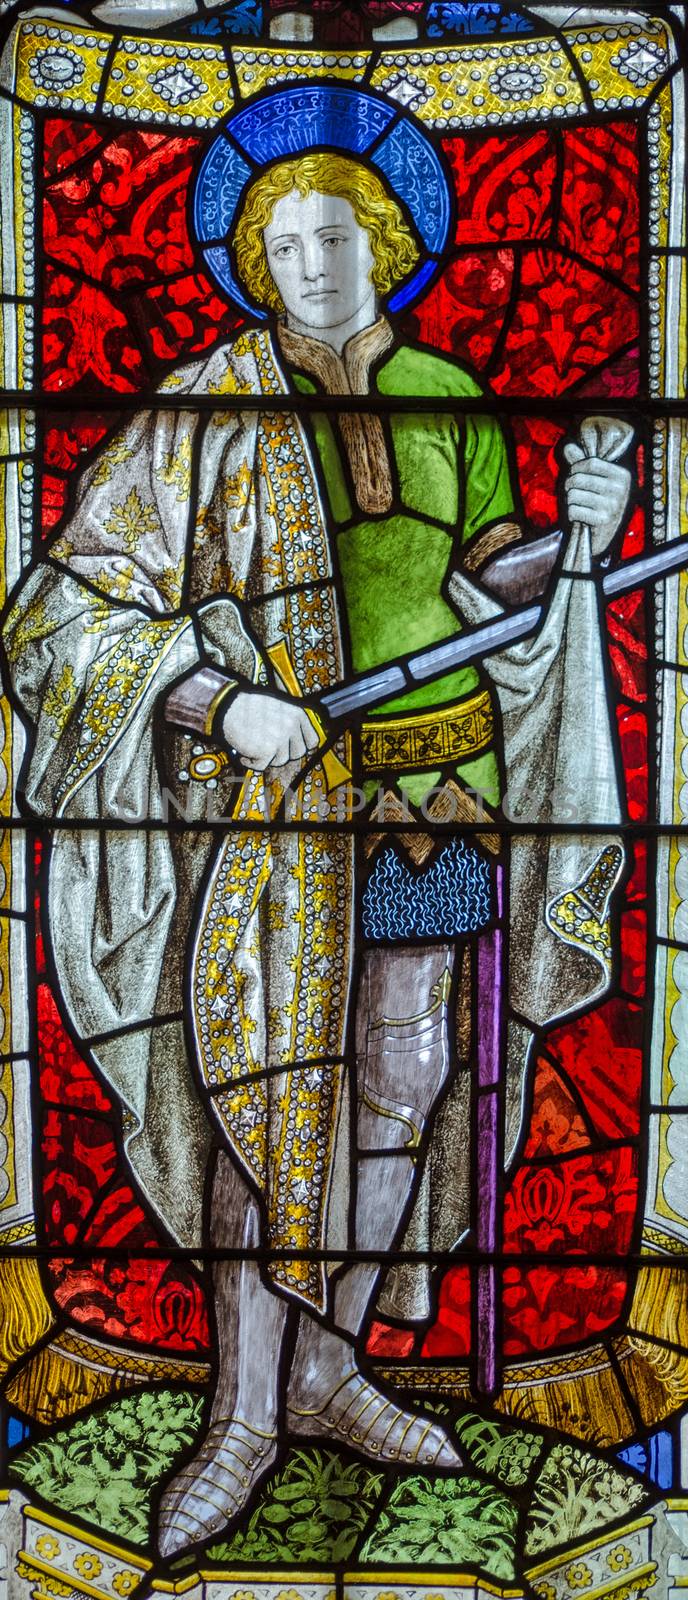 Victorian stained glass window showing Saint Martin, the Roman Soldier who cut up his cloak to give to a needy person.  Historic church window on public display for 120 years.